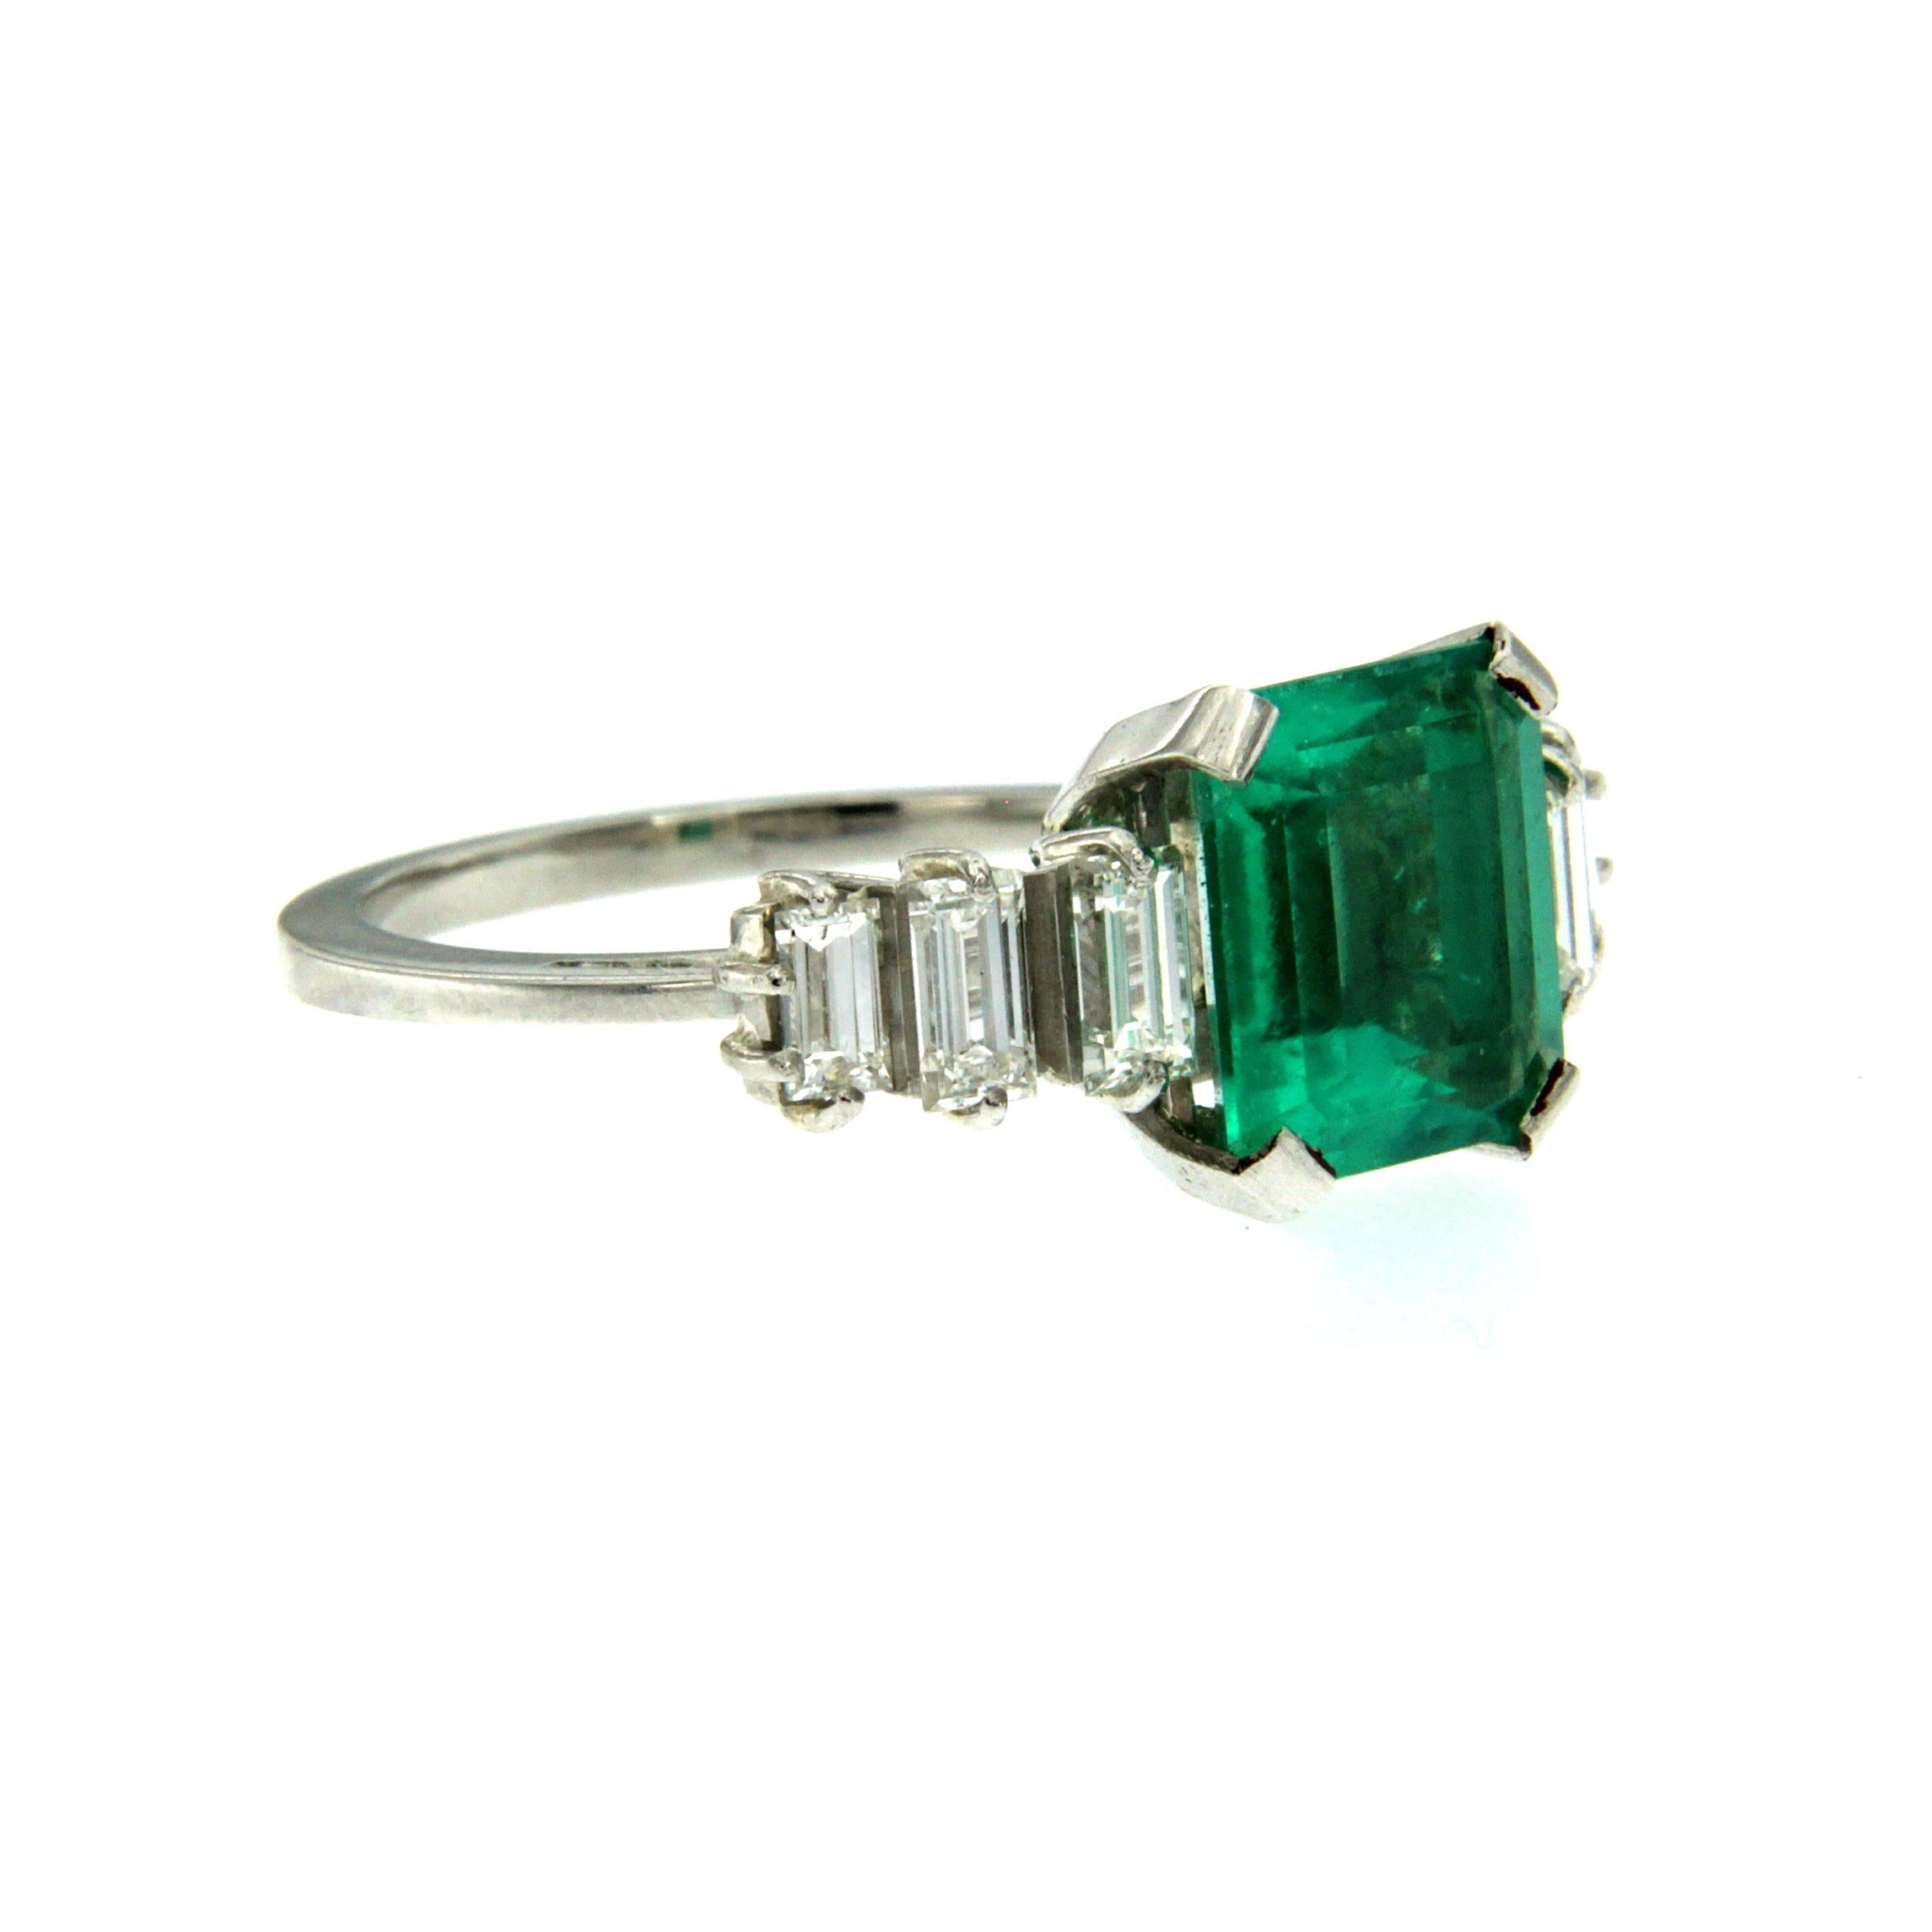 An exquisite engagement ring set in Platinum featuring a 3.25 ct Emerald-cut Colombian Emerald. Flanked on each side are baguette cut diamonds totaling 1.01 carats.

CONDITION: Pre-Owned - Excellent
METAL: Platinum
GEM STONE: Colombian Emerald 3.25